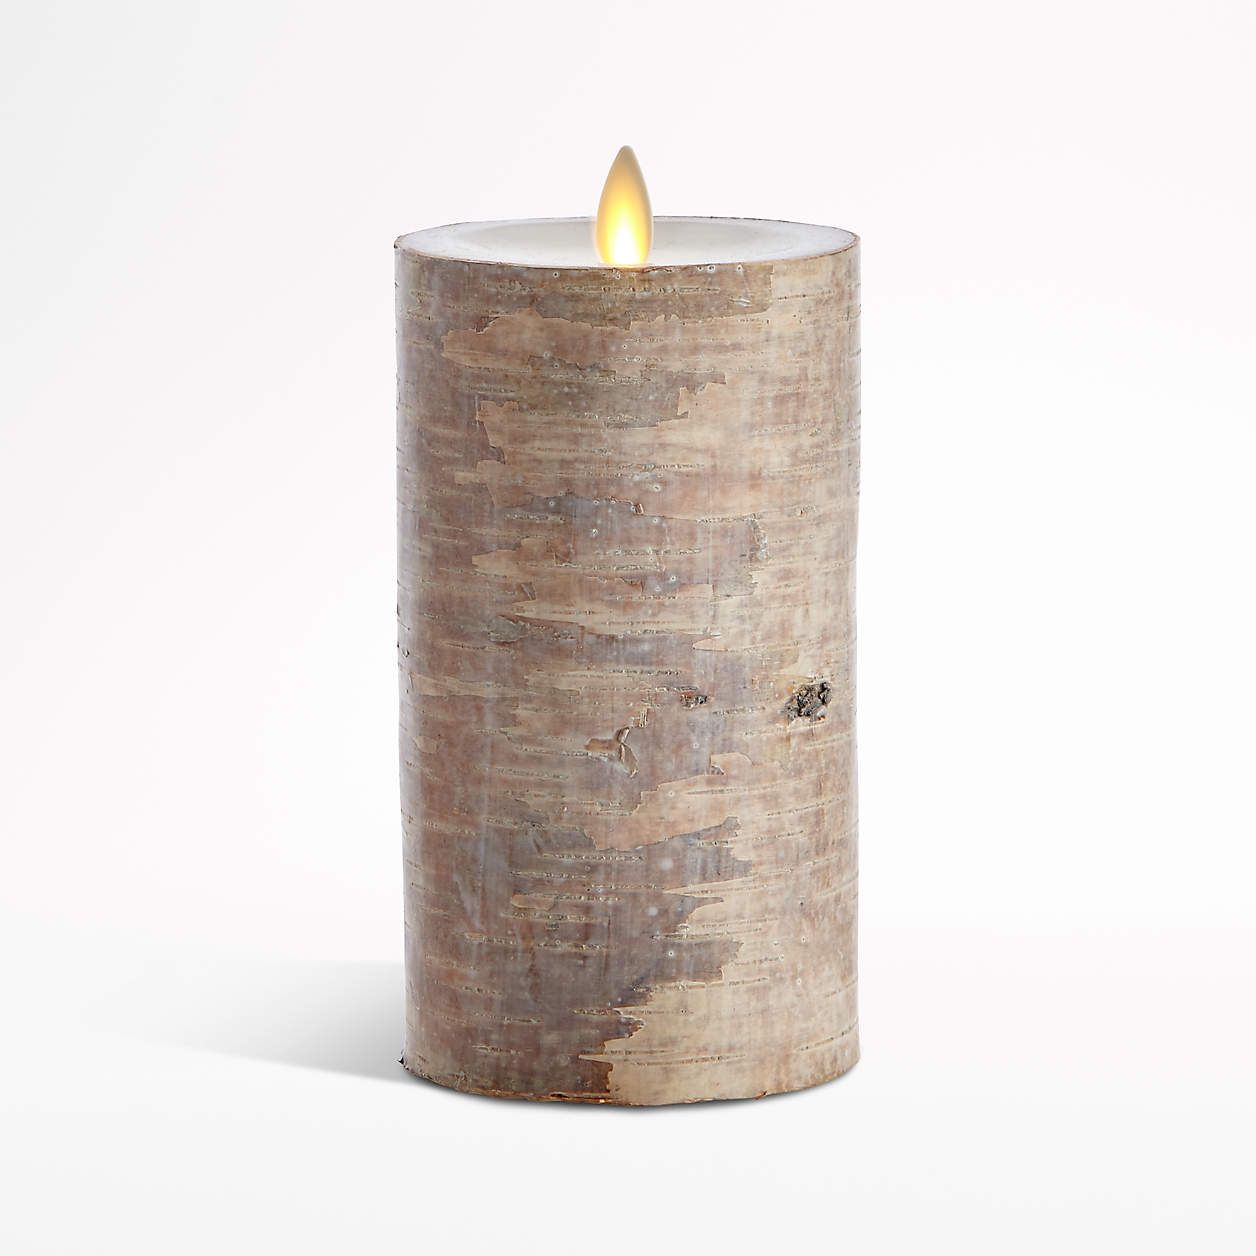 White Birch 3x4 Flameless Pillar Candle + Reviews | Crate and Barrel | Crate & Barrel